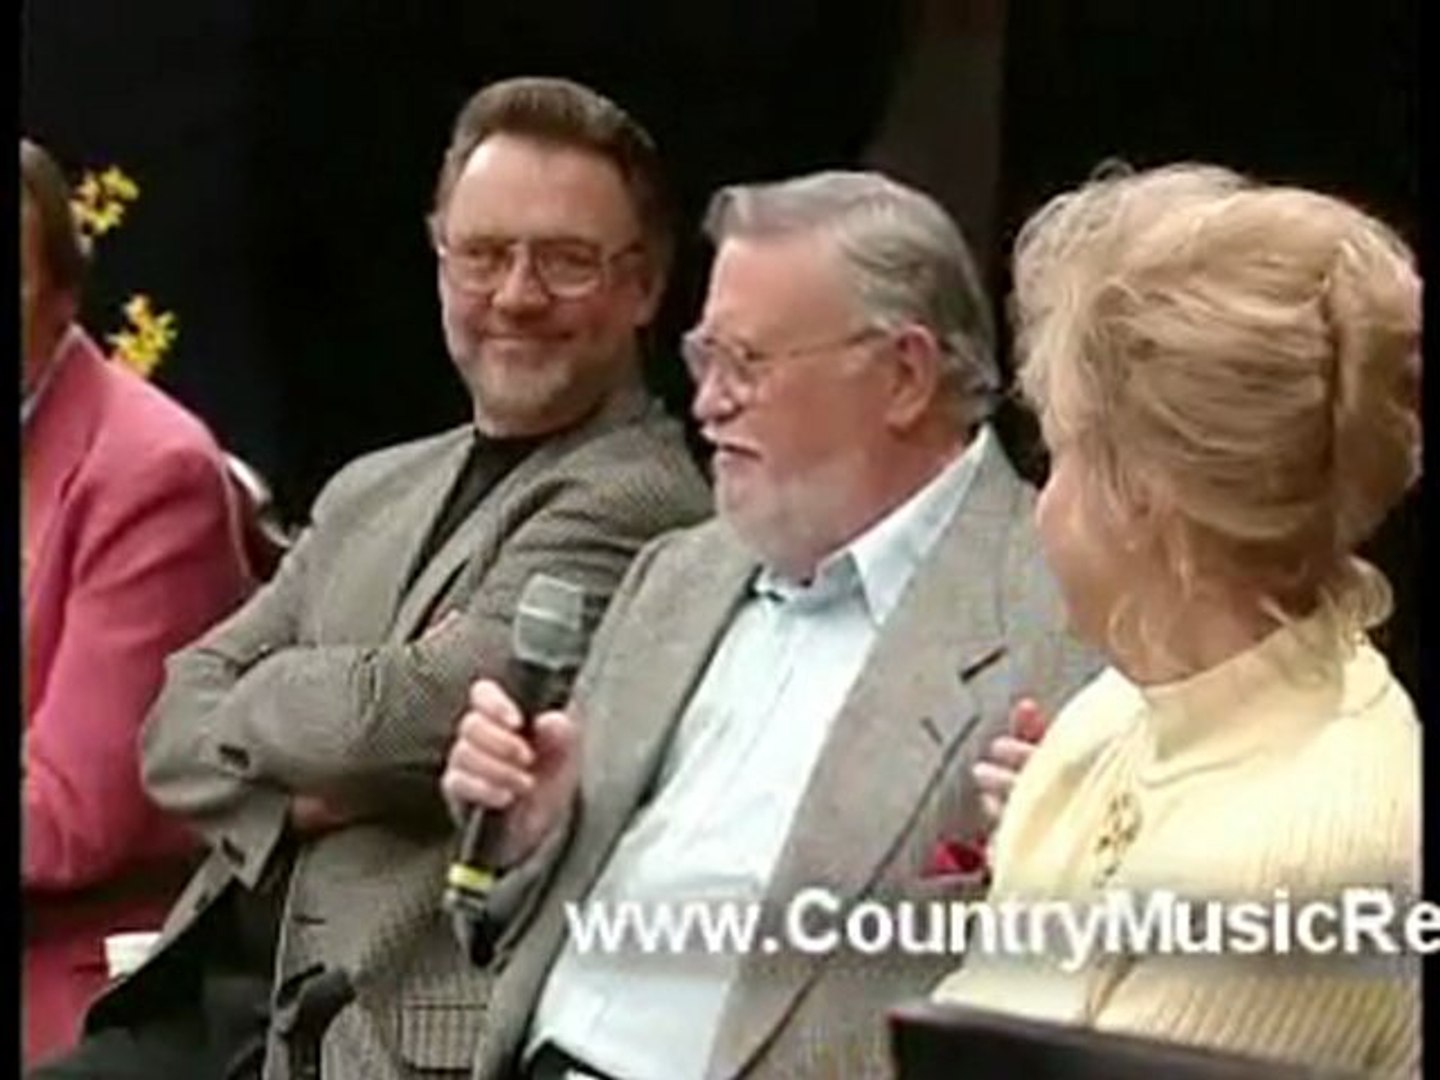 christian country music-christian country songs